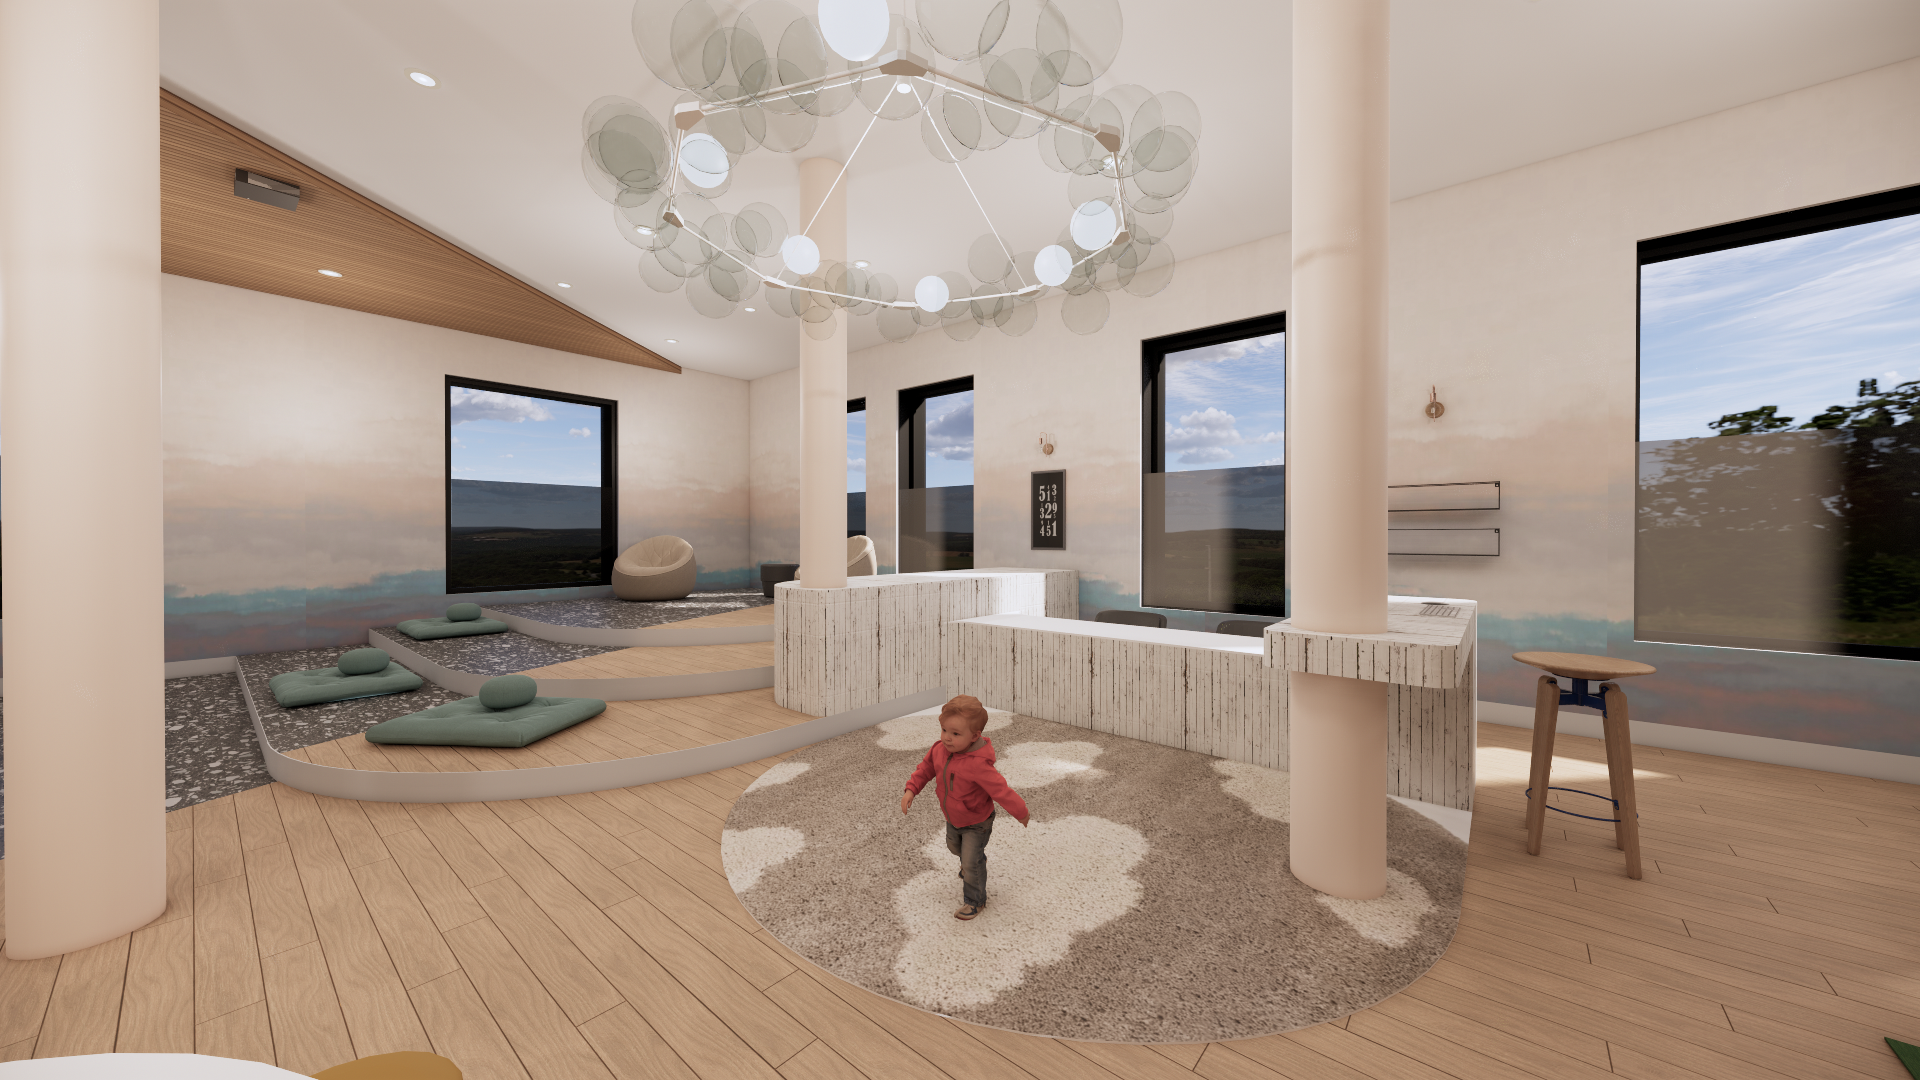 the sitting room - Daycare Rendering